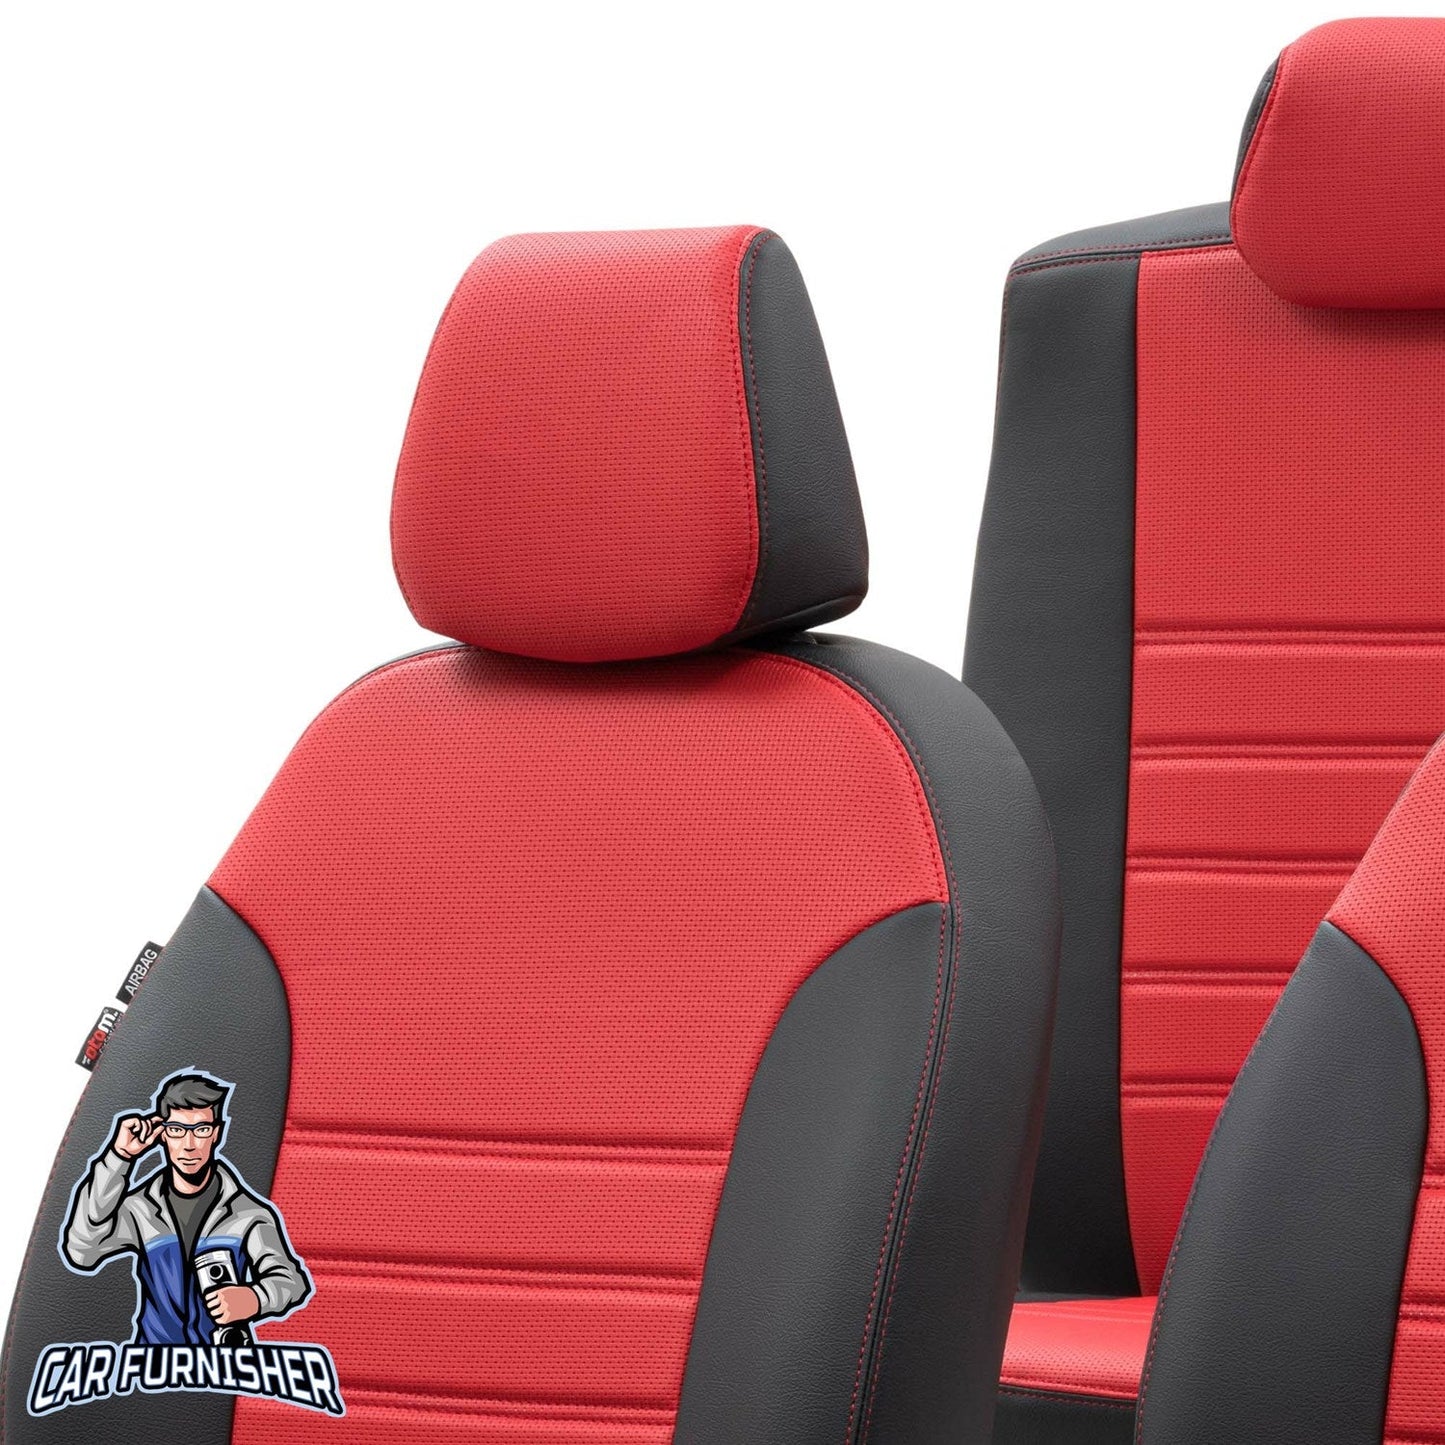 Mercedes Citan Seat Covers New York Leather Design Red Leather